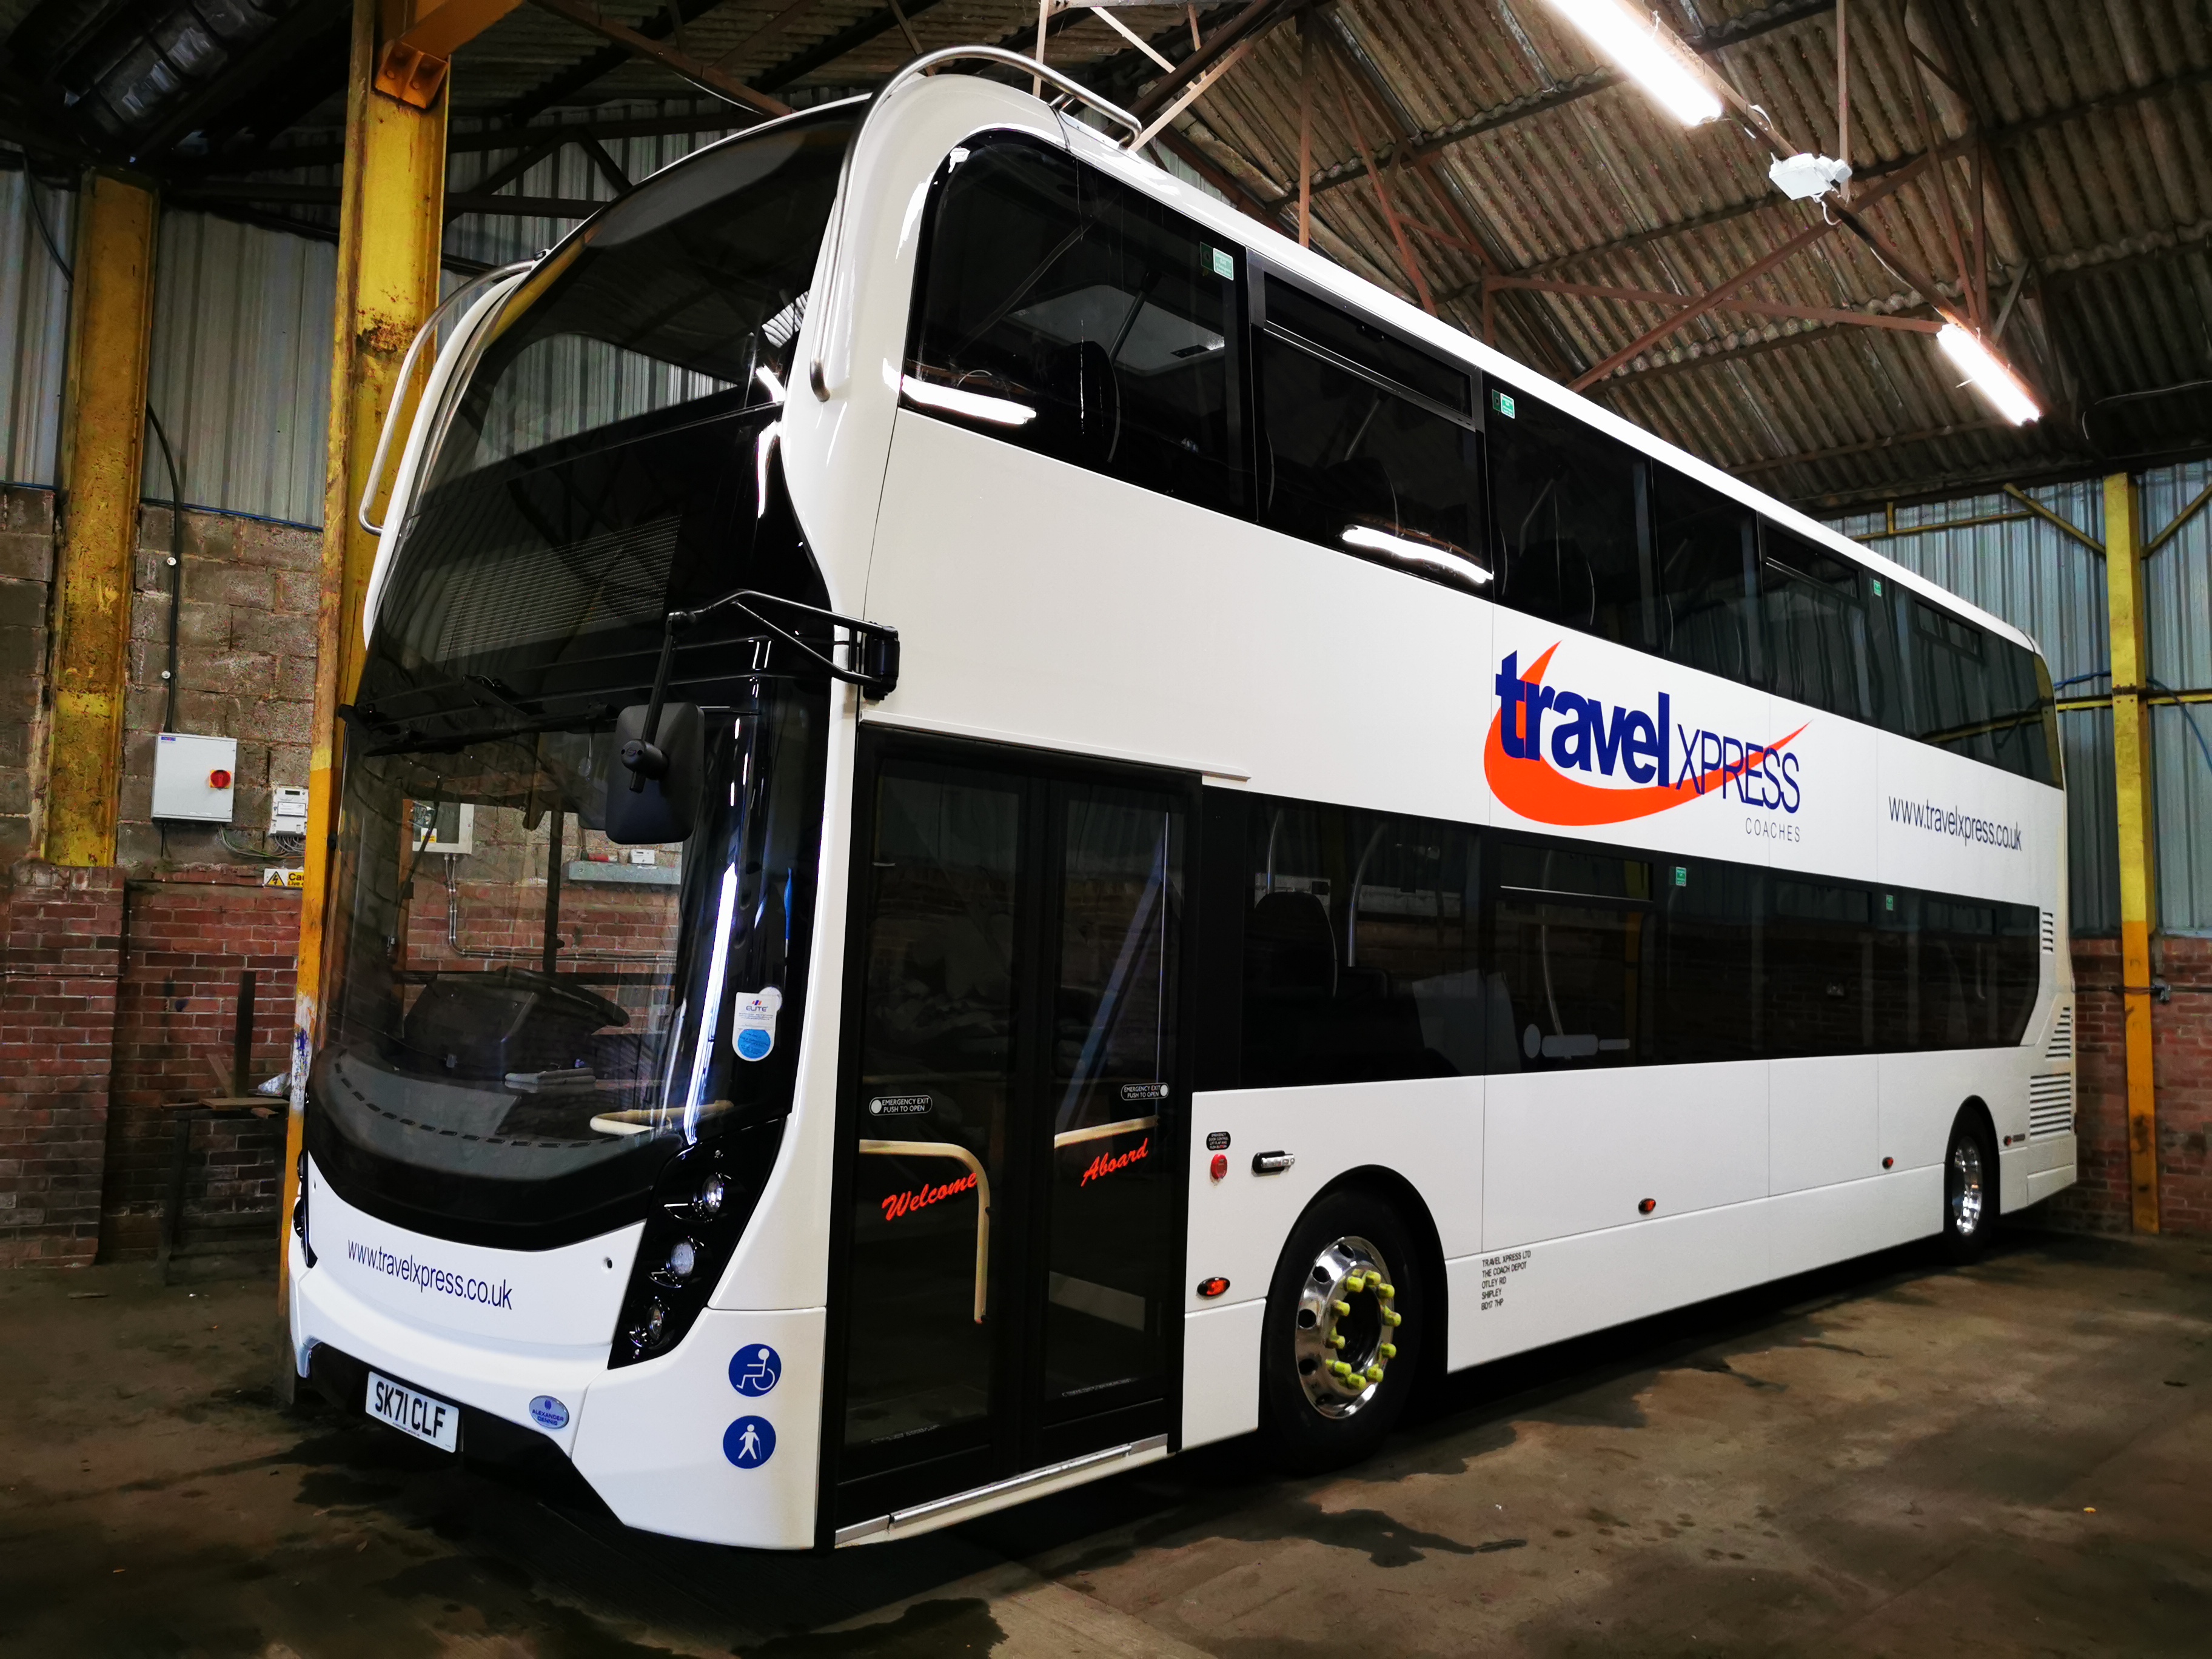 Mistral funds Travel Xpress’ new Enviro400